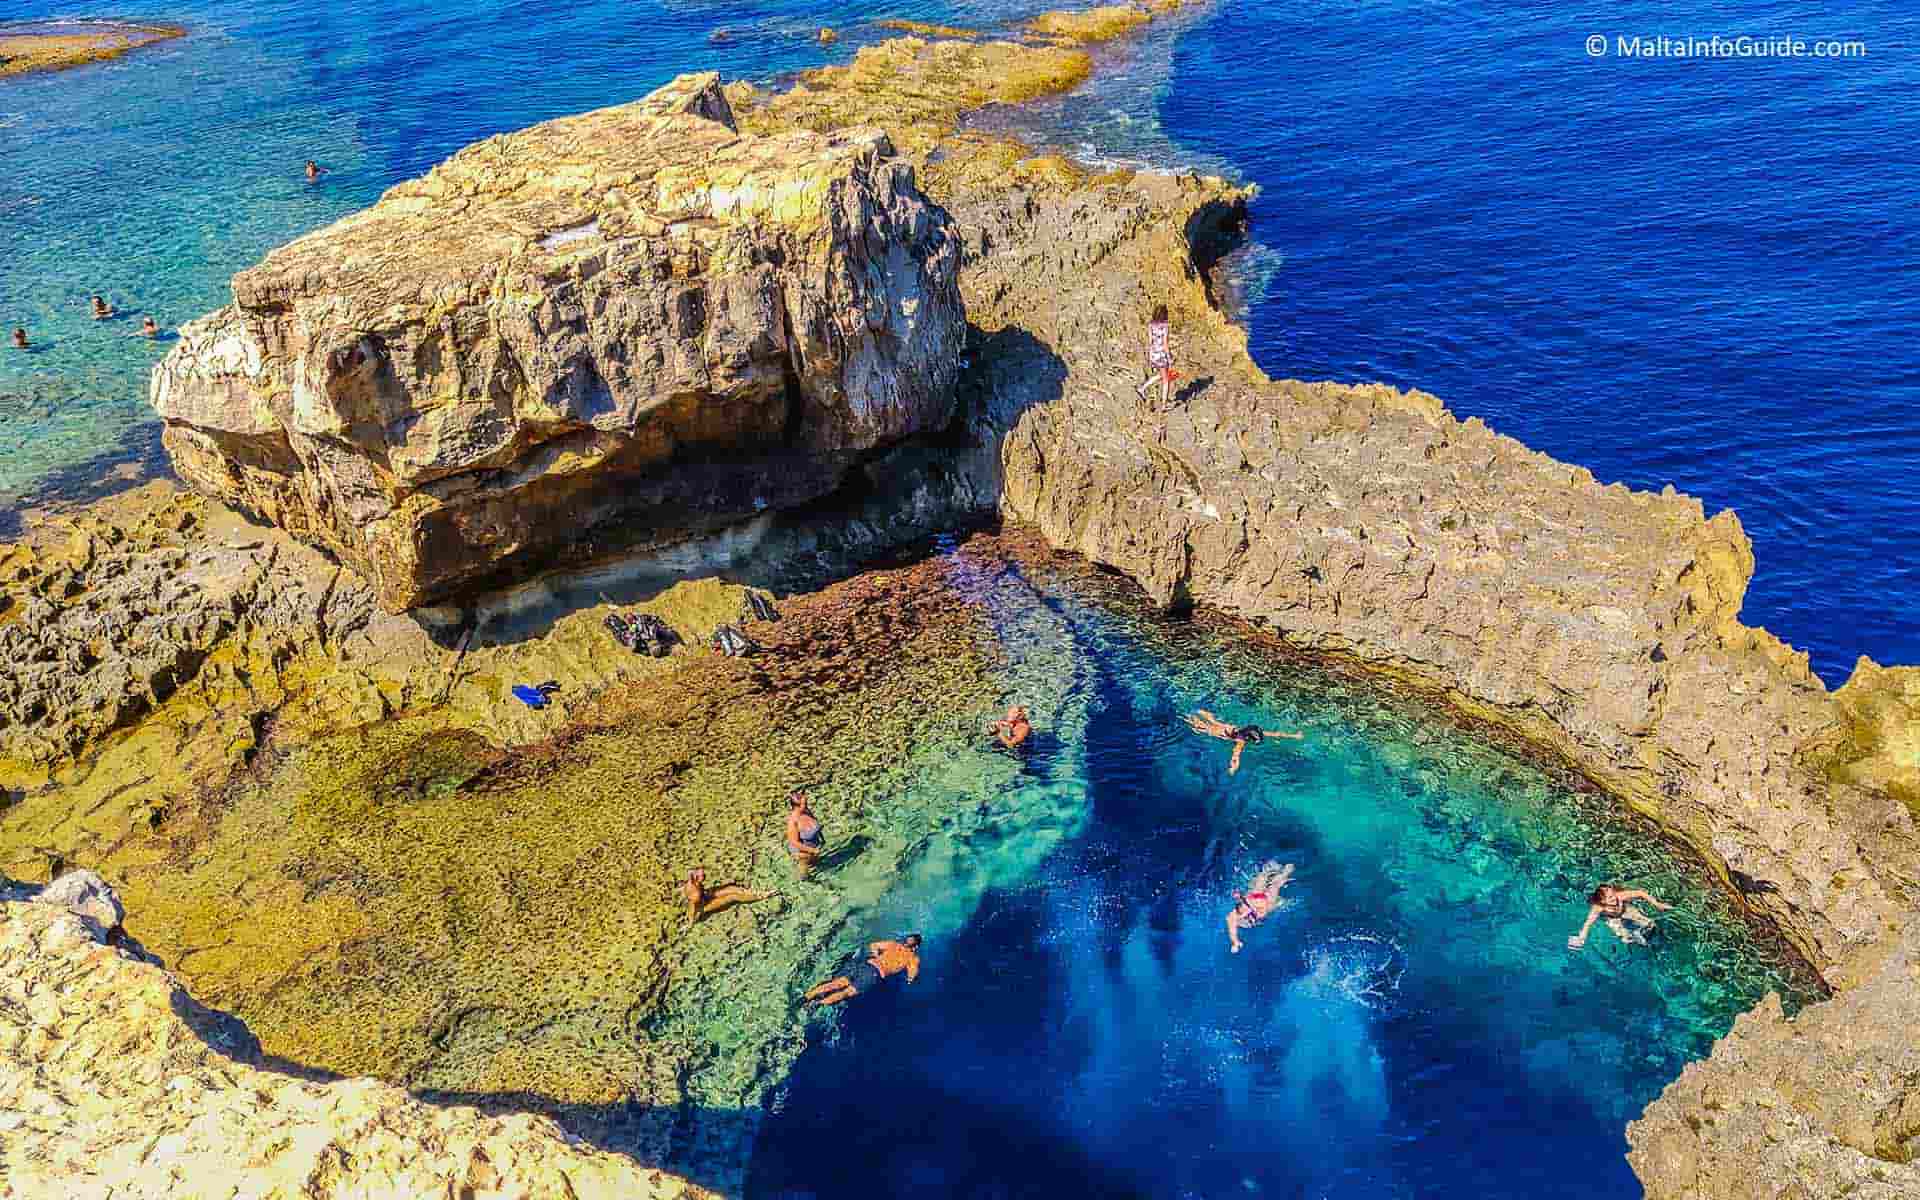 A few people swimming at the Blue Hole in Gozo. Visiting this hidden gem makes you capture the best Gozo beaches photos.